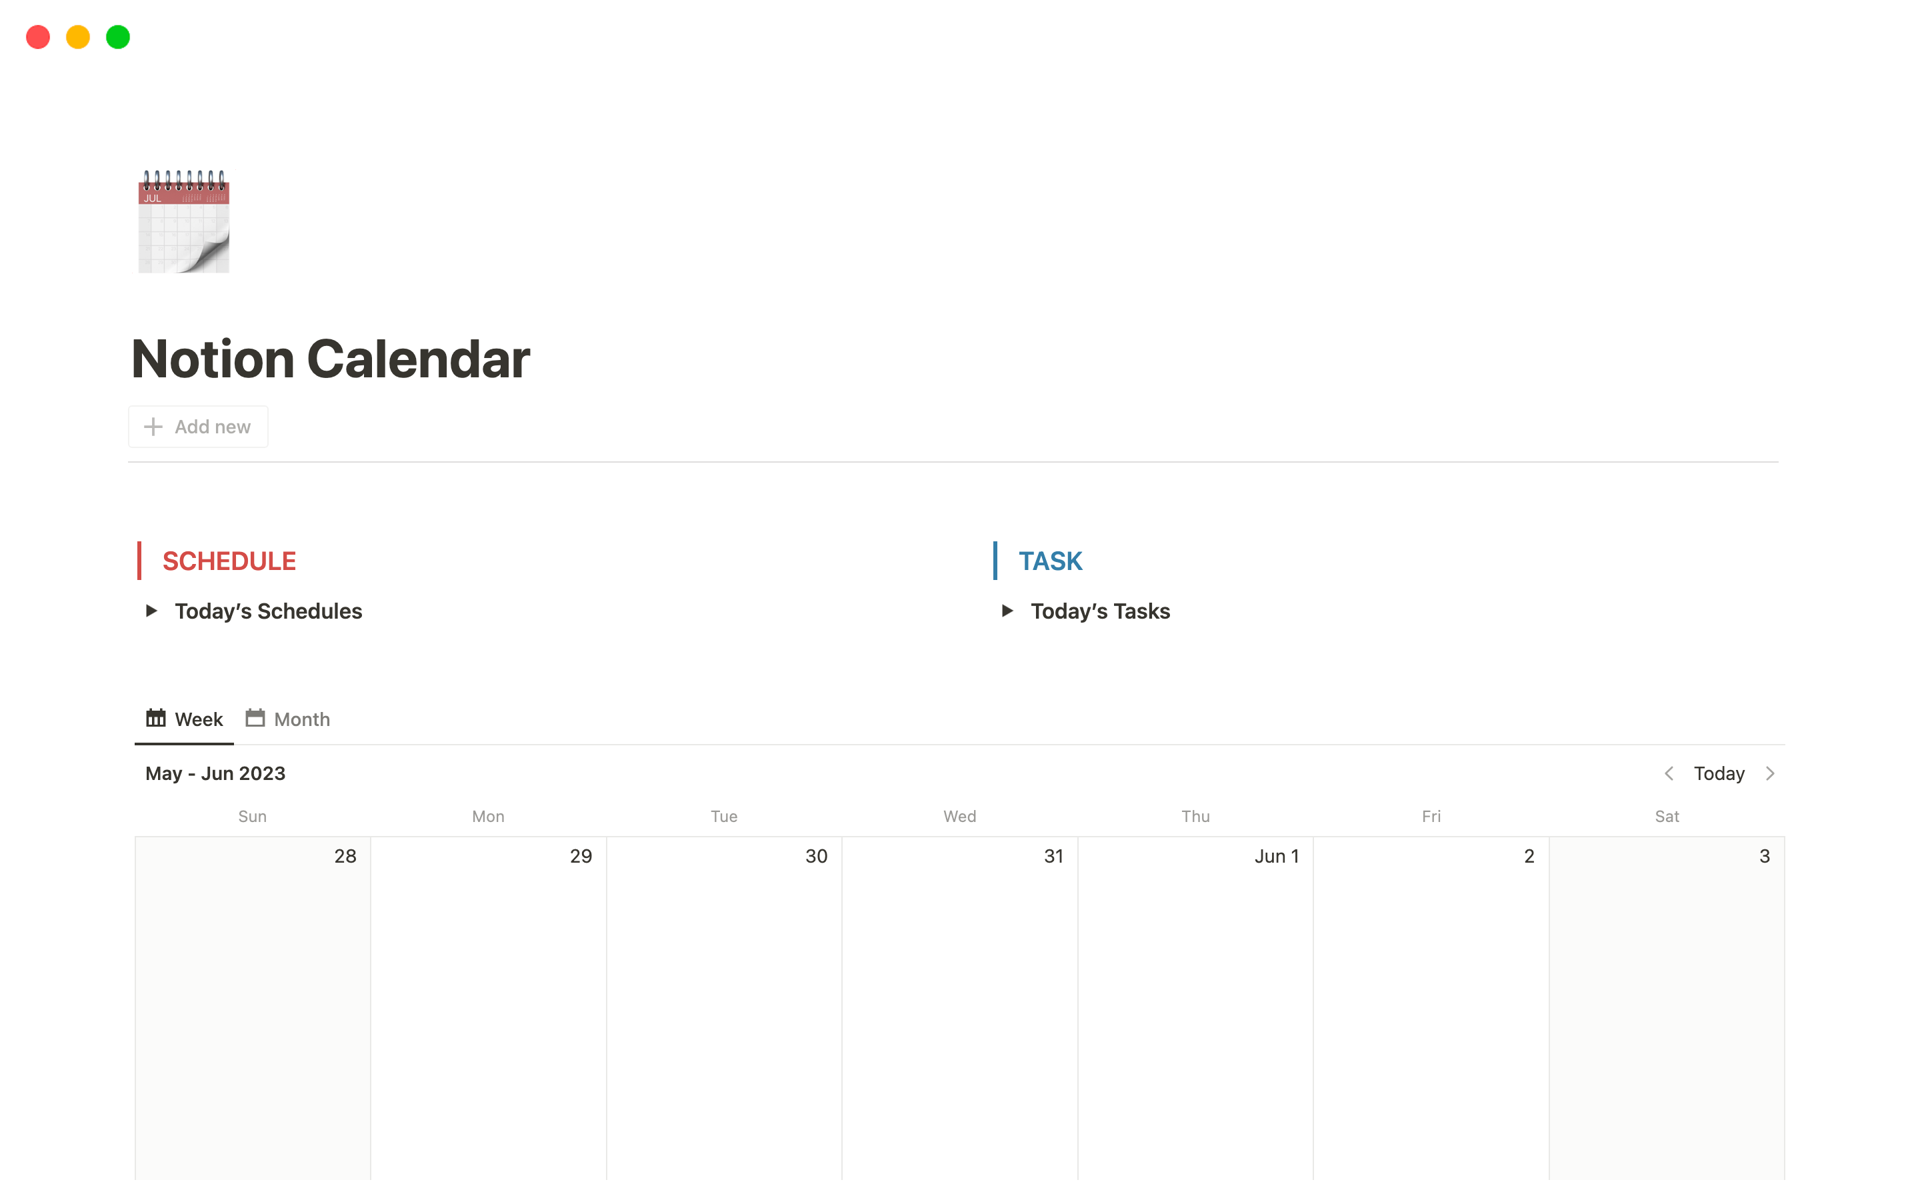 This calendar template helps you manage your schedules and tasks on a daily basis.